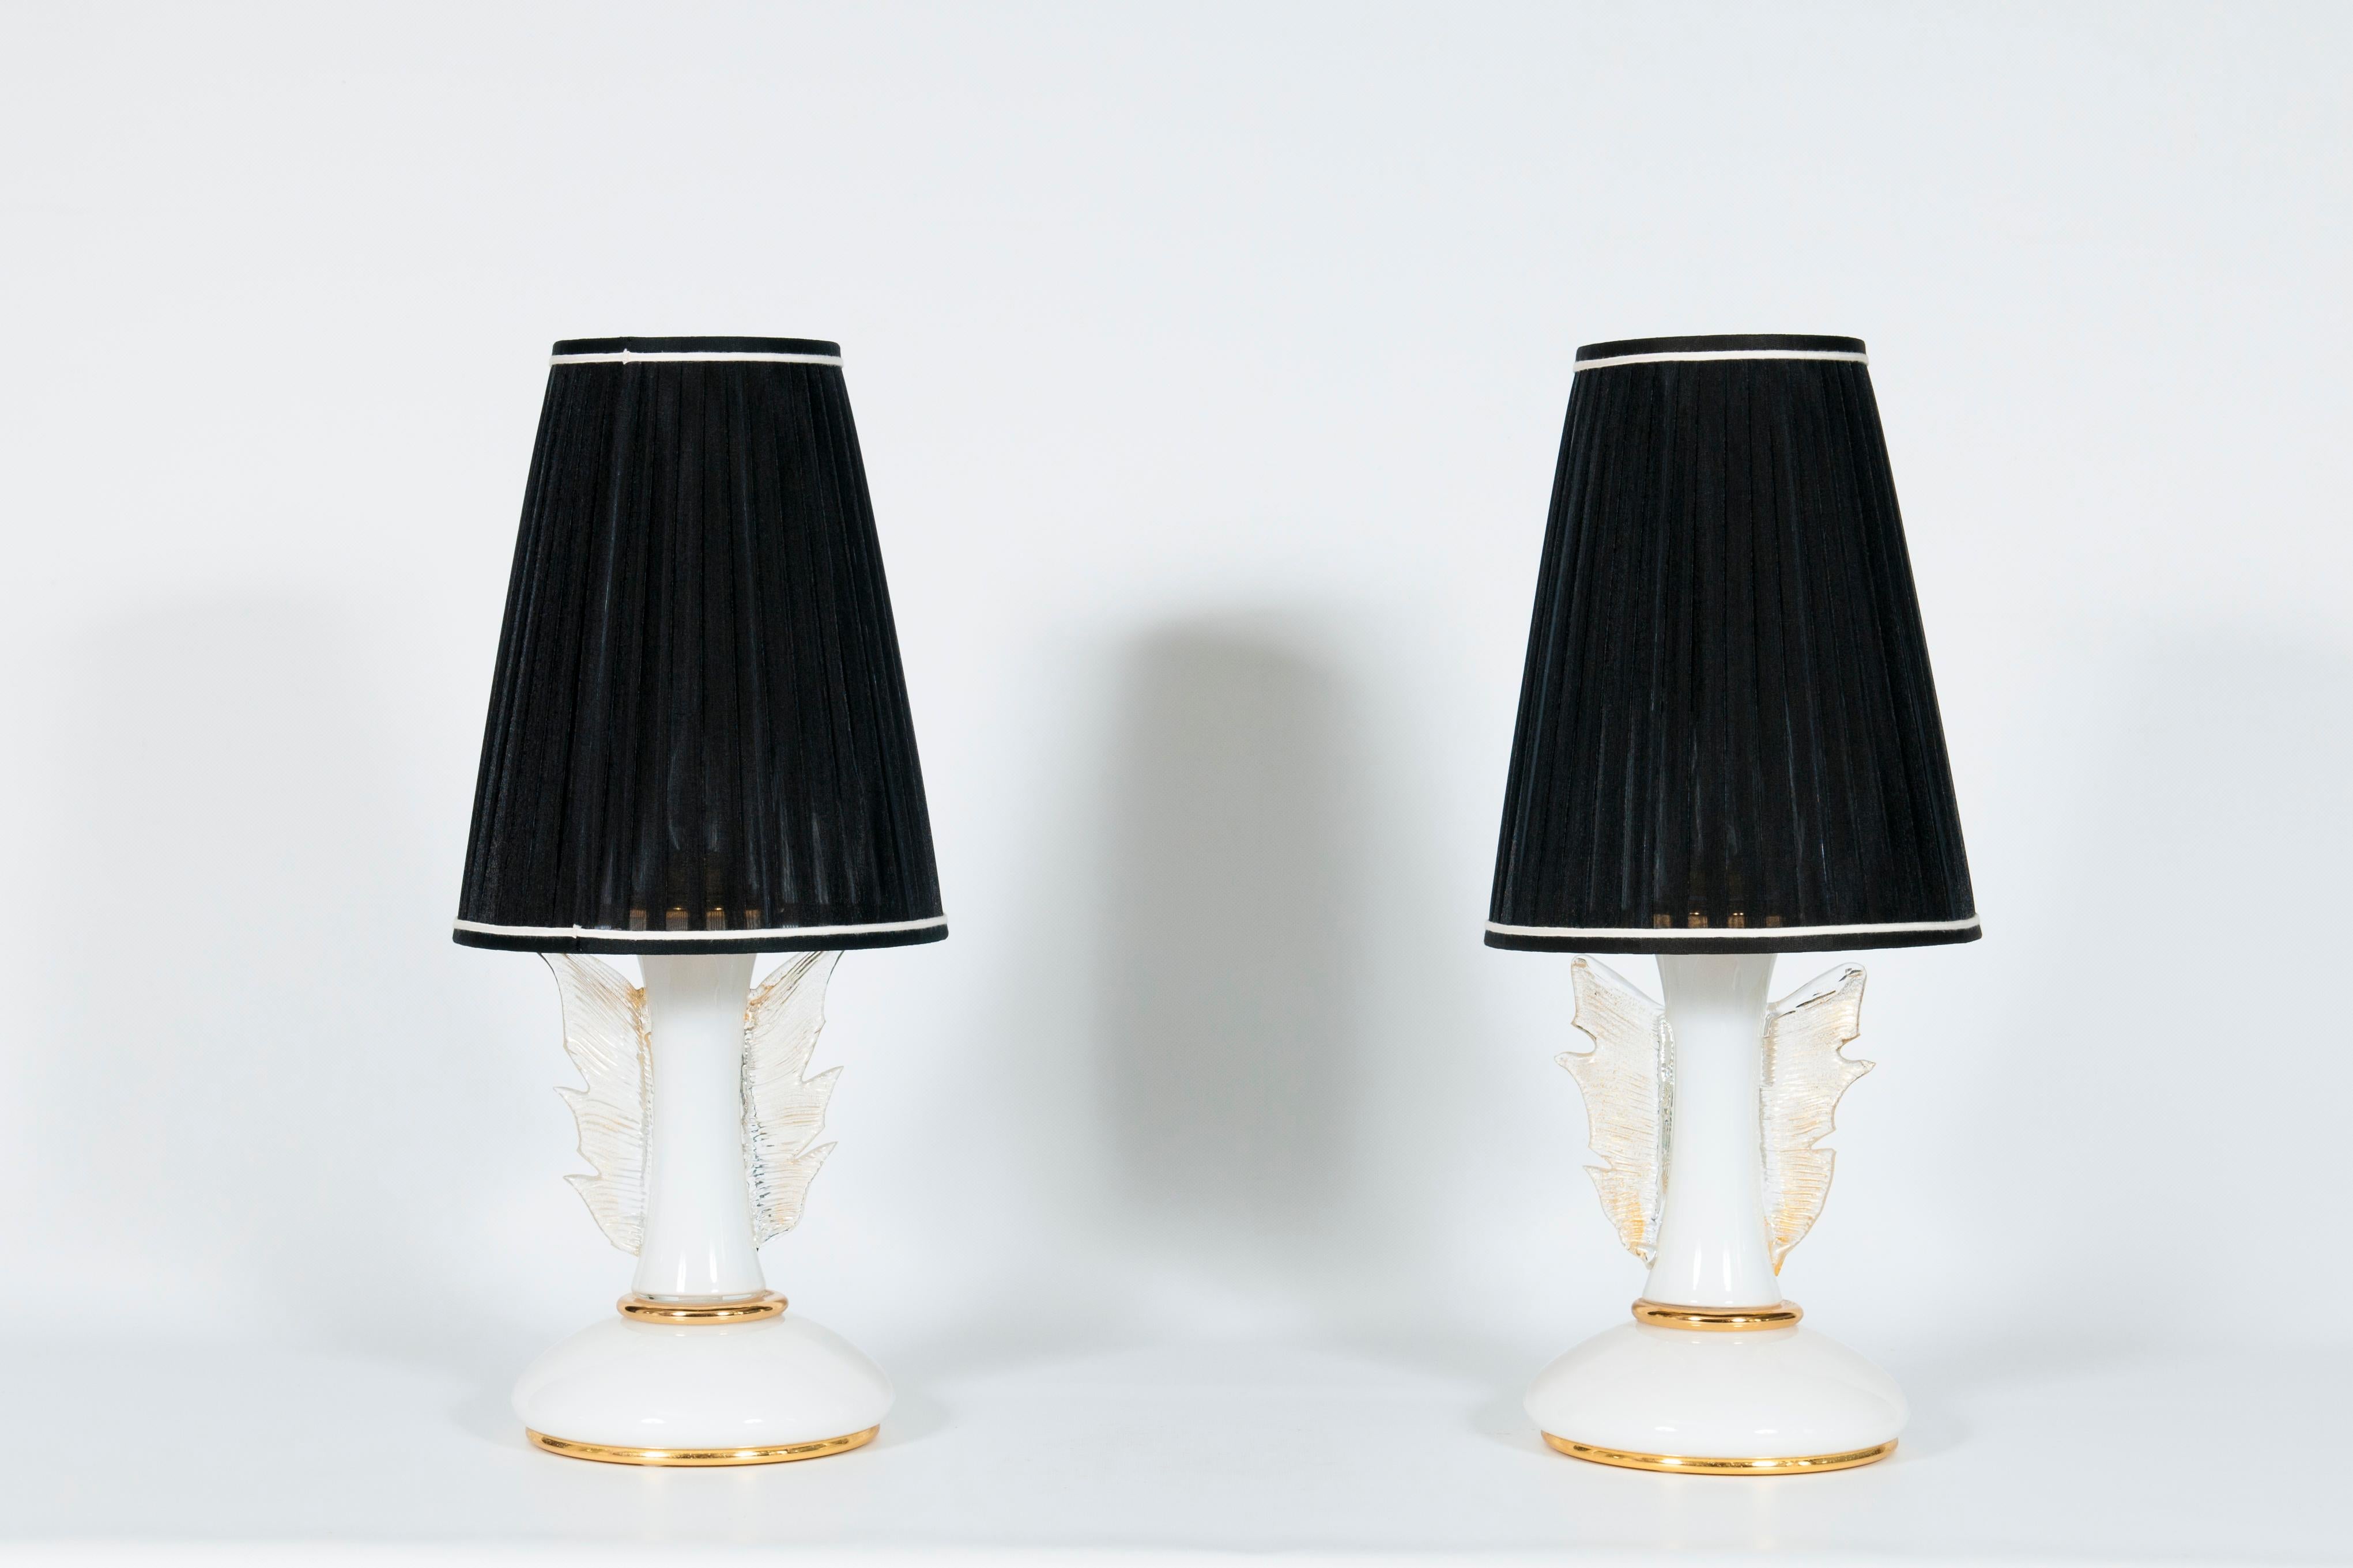 Elegant Gold Wings Table Lamps in blown Murano Glass, 1970s Italy .
These masterpieces are composed of a gold frame with an internal metal core joining the glass parts. Each lamp has a pair of gold wings on the sides; all elements are made of blown,